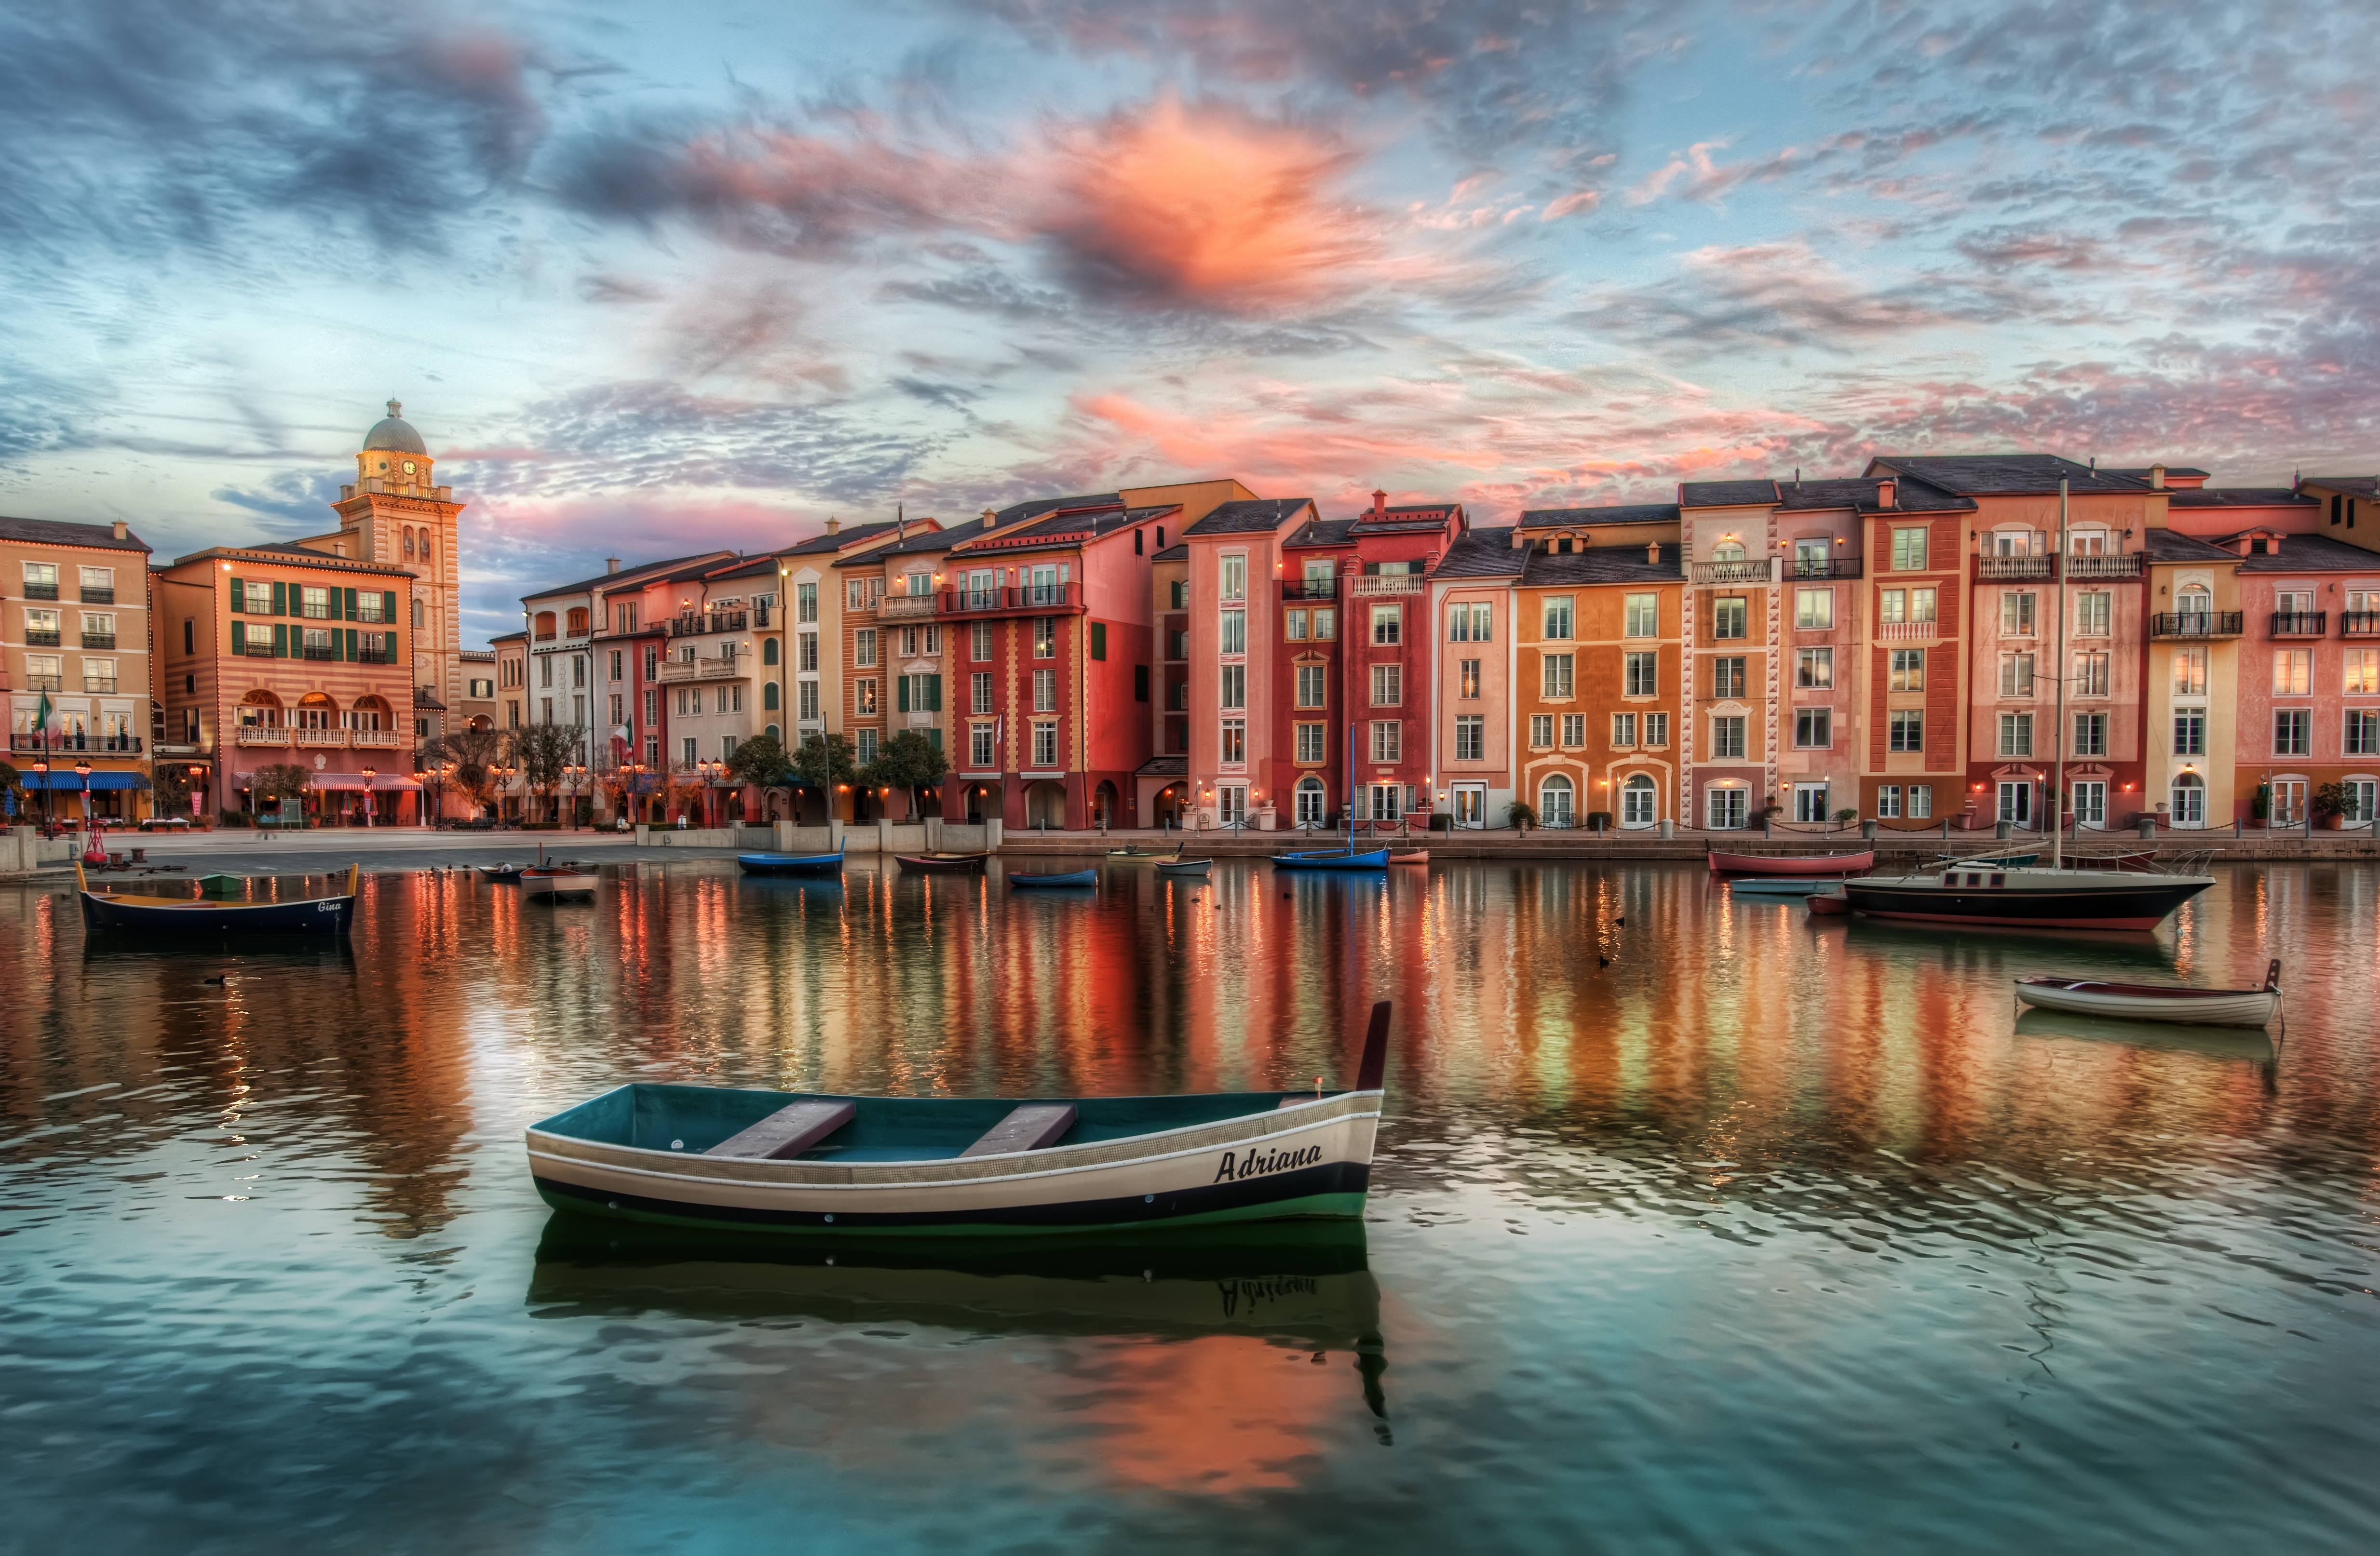 Houses along the Lake in Orlando, Florida by Trey Ratcliff